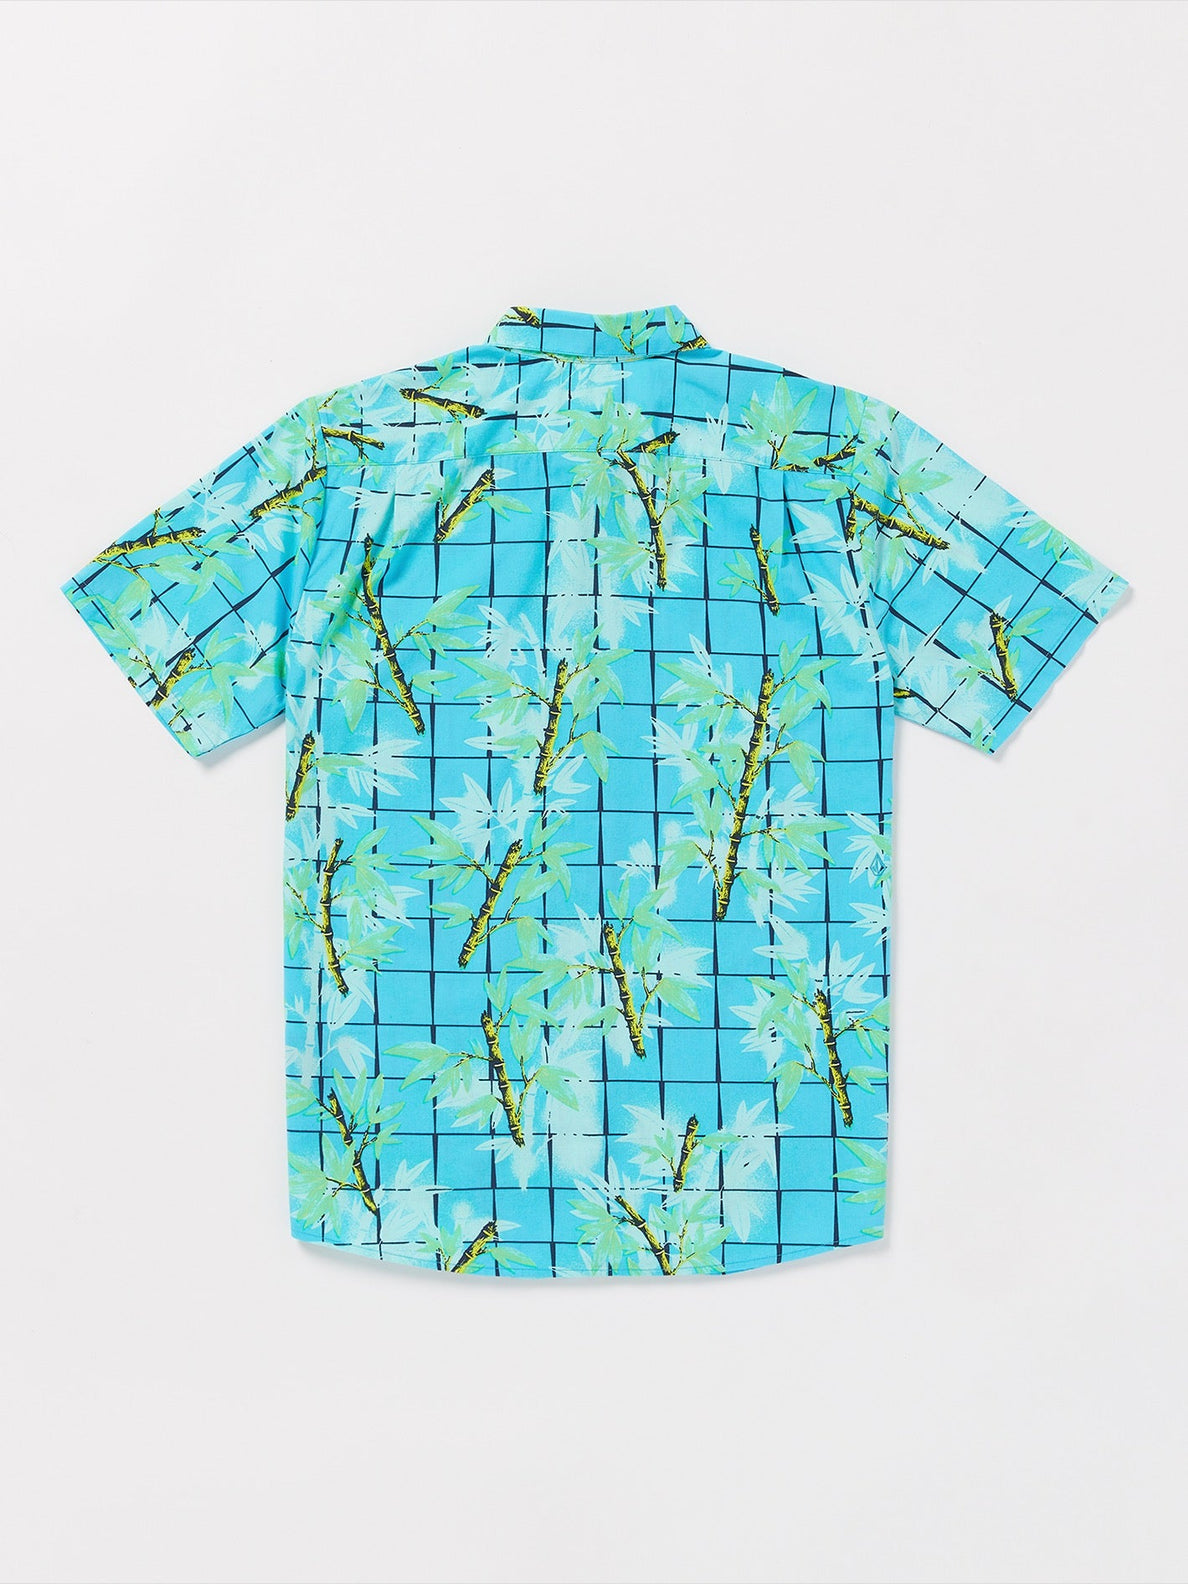 Bamboozeled Floral Short Sleeve Shirt - Clearwater